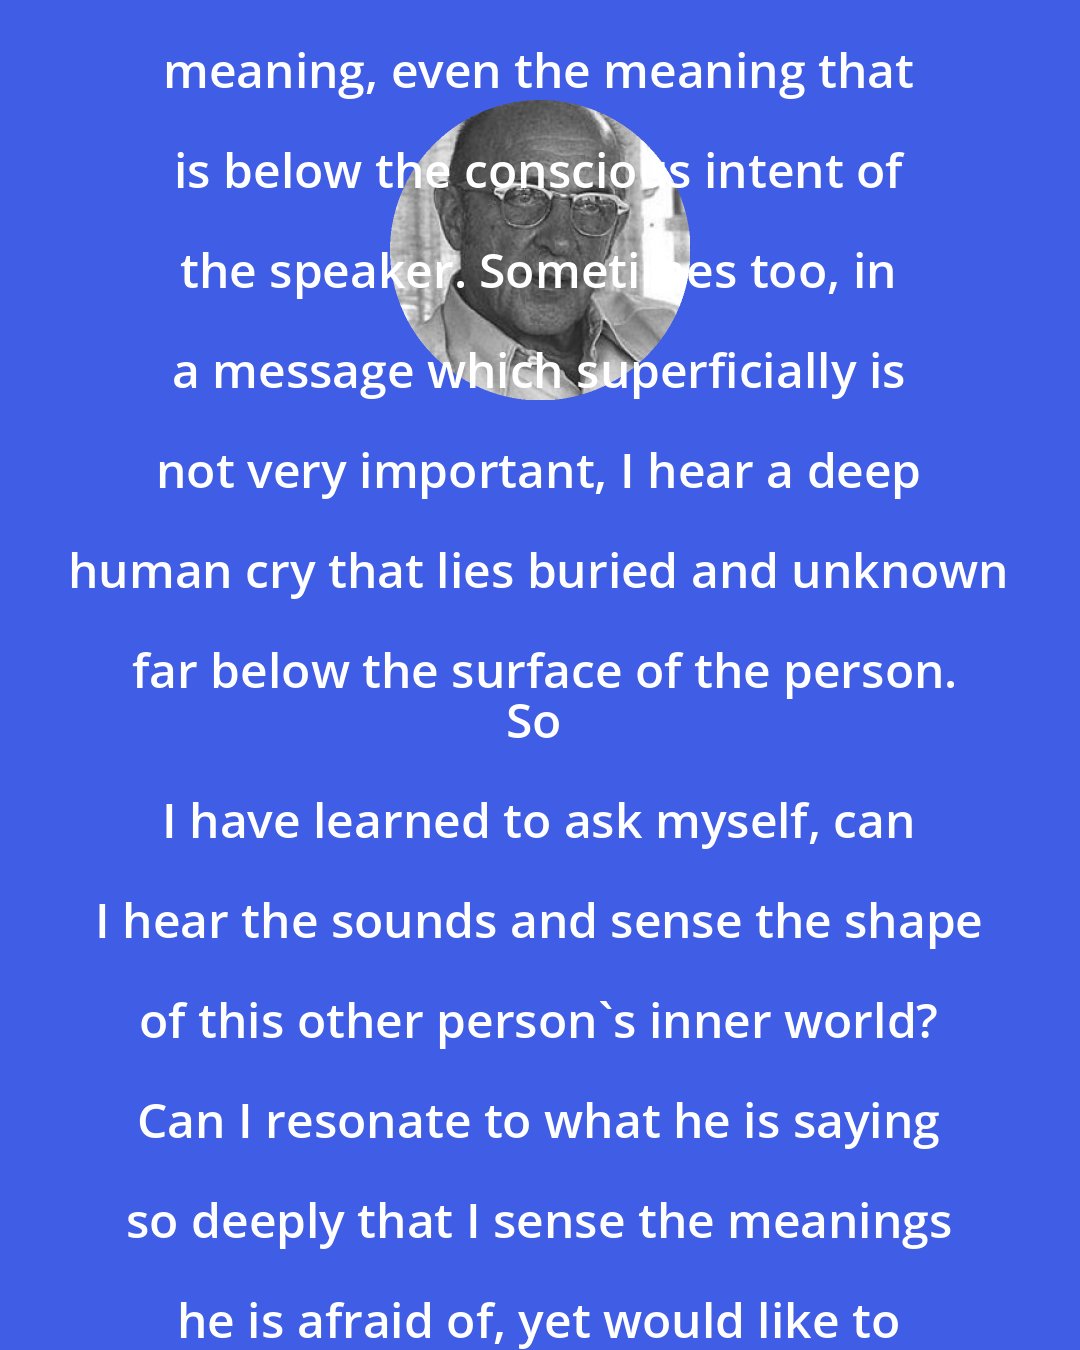 Carl Rogers: I hear the words, the thoughts, the feeling tones, the personal meaning, even the meaning that is below the conscious intent of the speaker. Sometimes too, in a message which superficially is not very important, I hear a deep human cry that lies buried and unknown far below the surface of the person.
So I have learned to ask myself, can I hear the sounds and sense the shape of this other person's inner world? Can I resonate to what he is saying so deeply that I sense the meanings he is afraid of, yet would like to communicate, as well as those he knows?